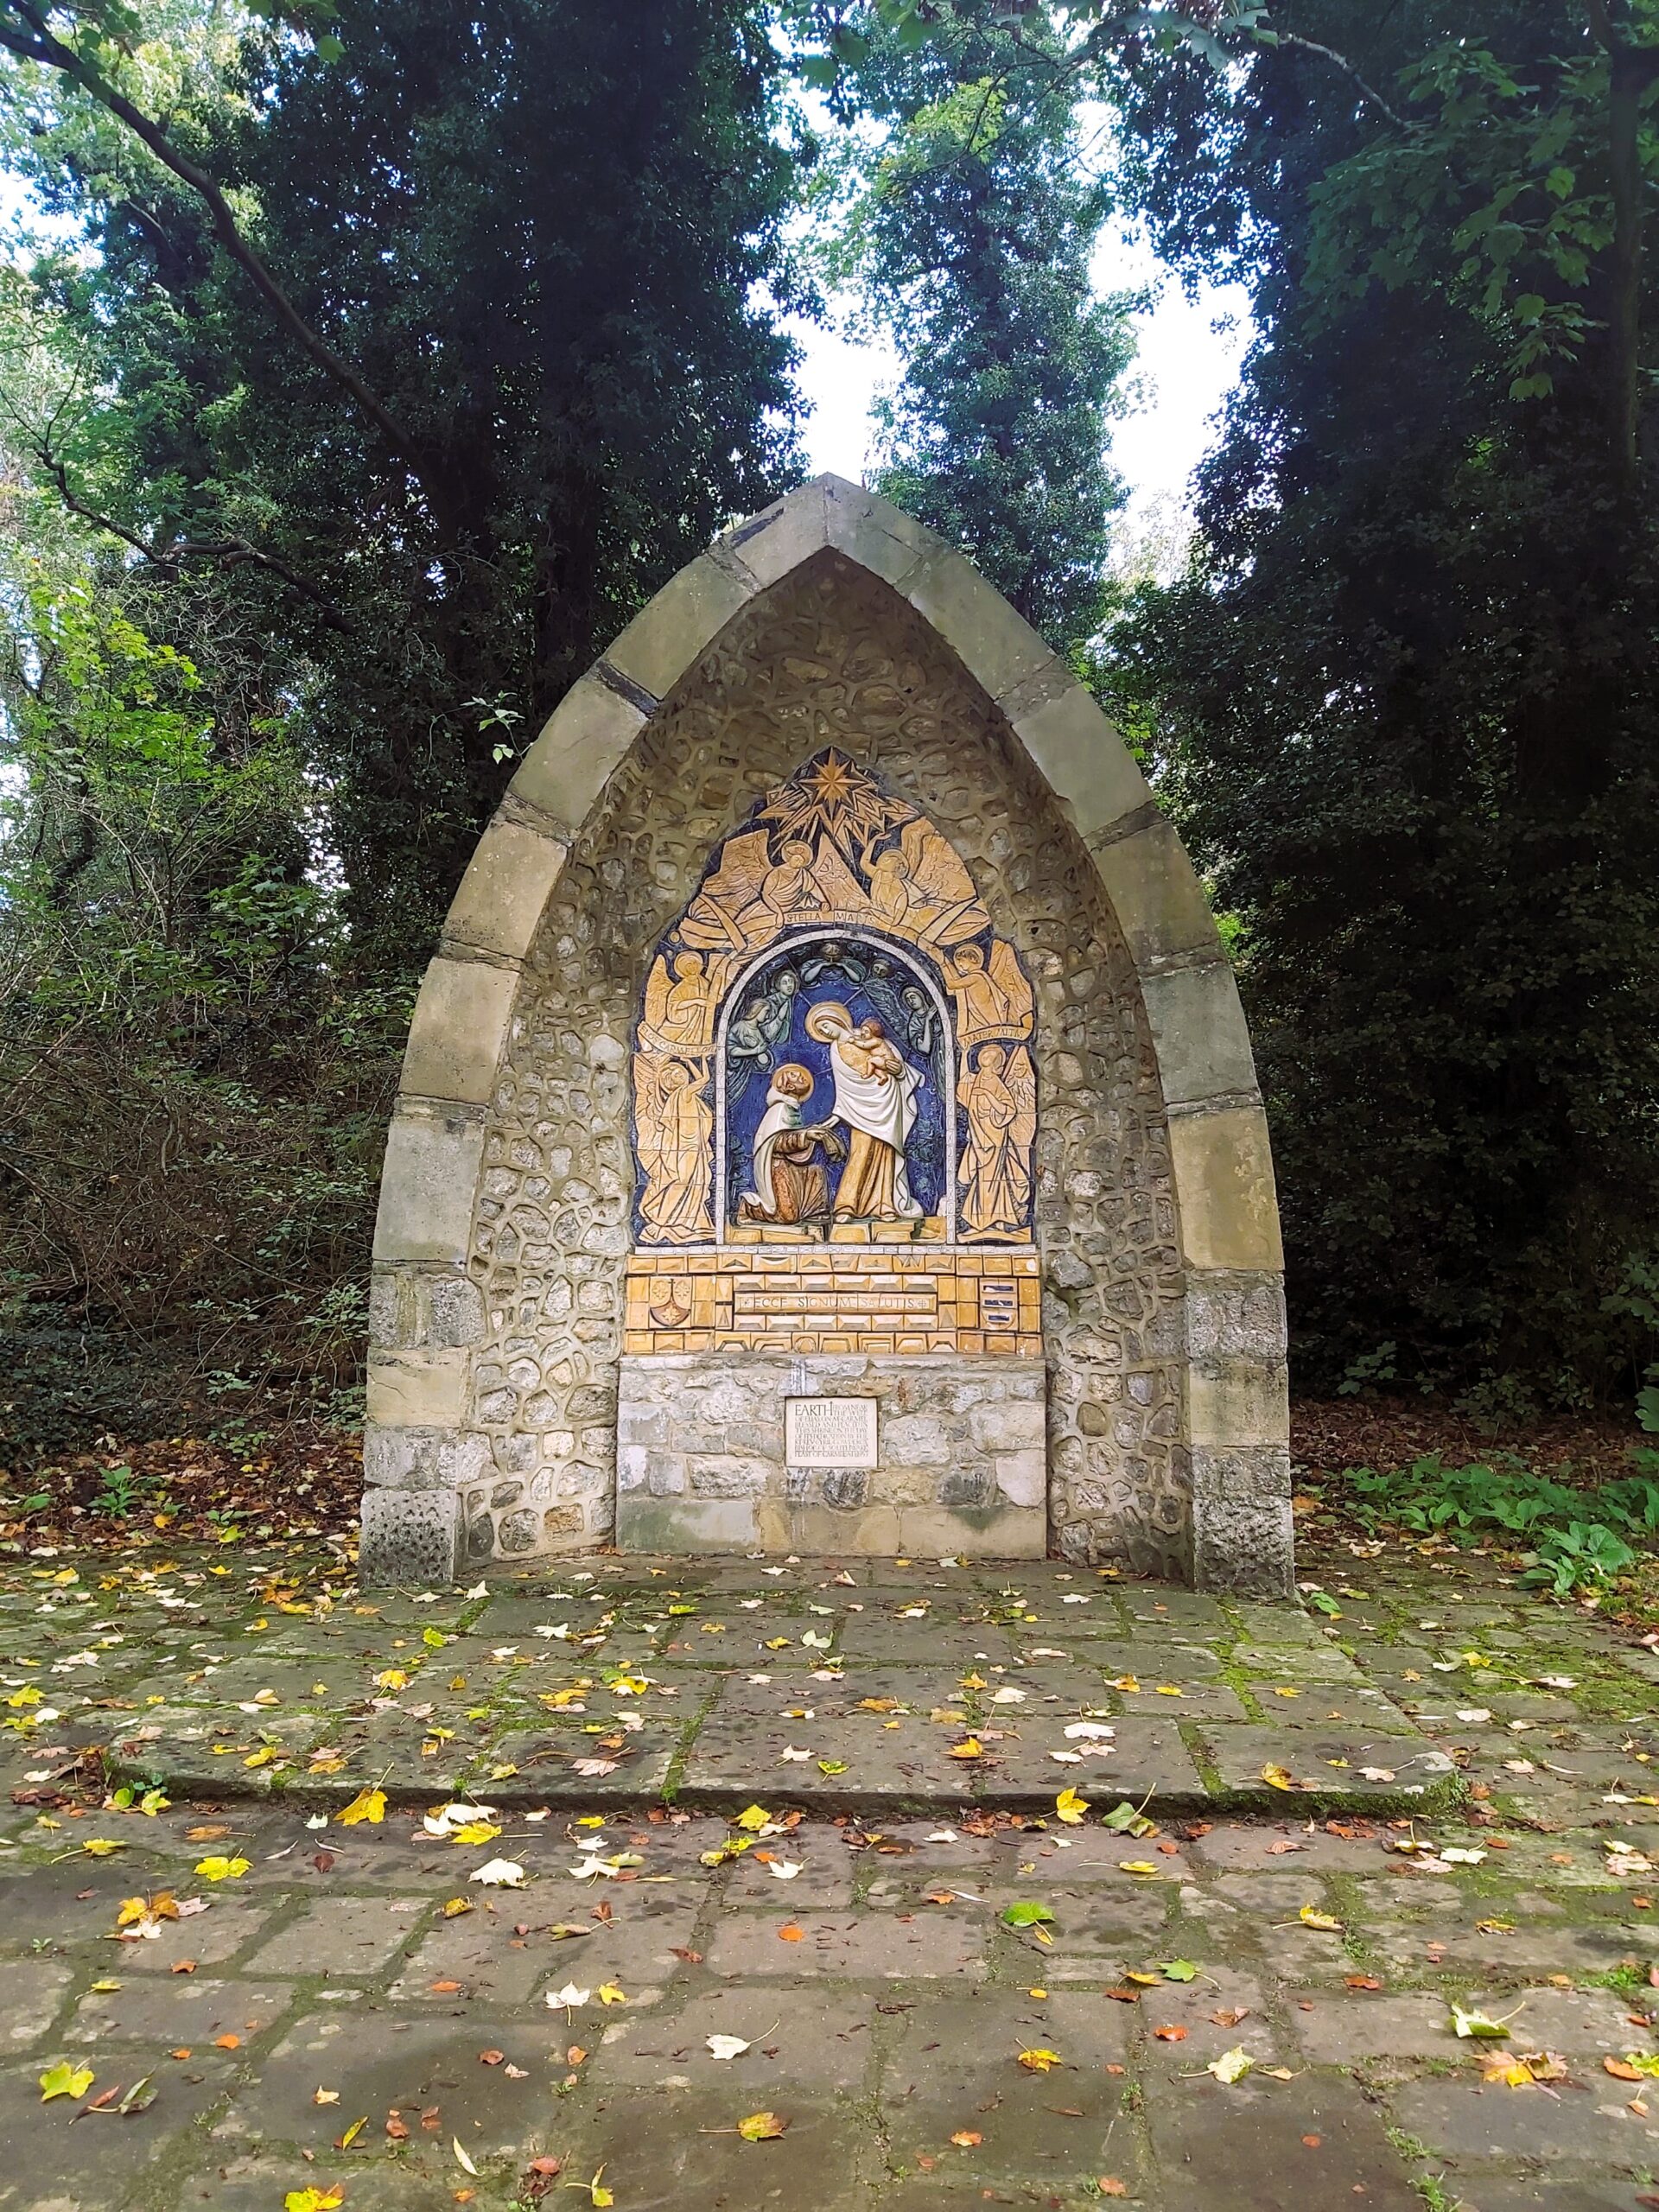 A religious scene in the garden at The Friars Aylesford Priory, Kent, England